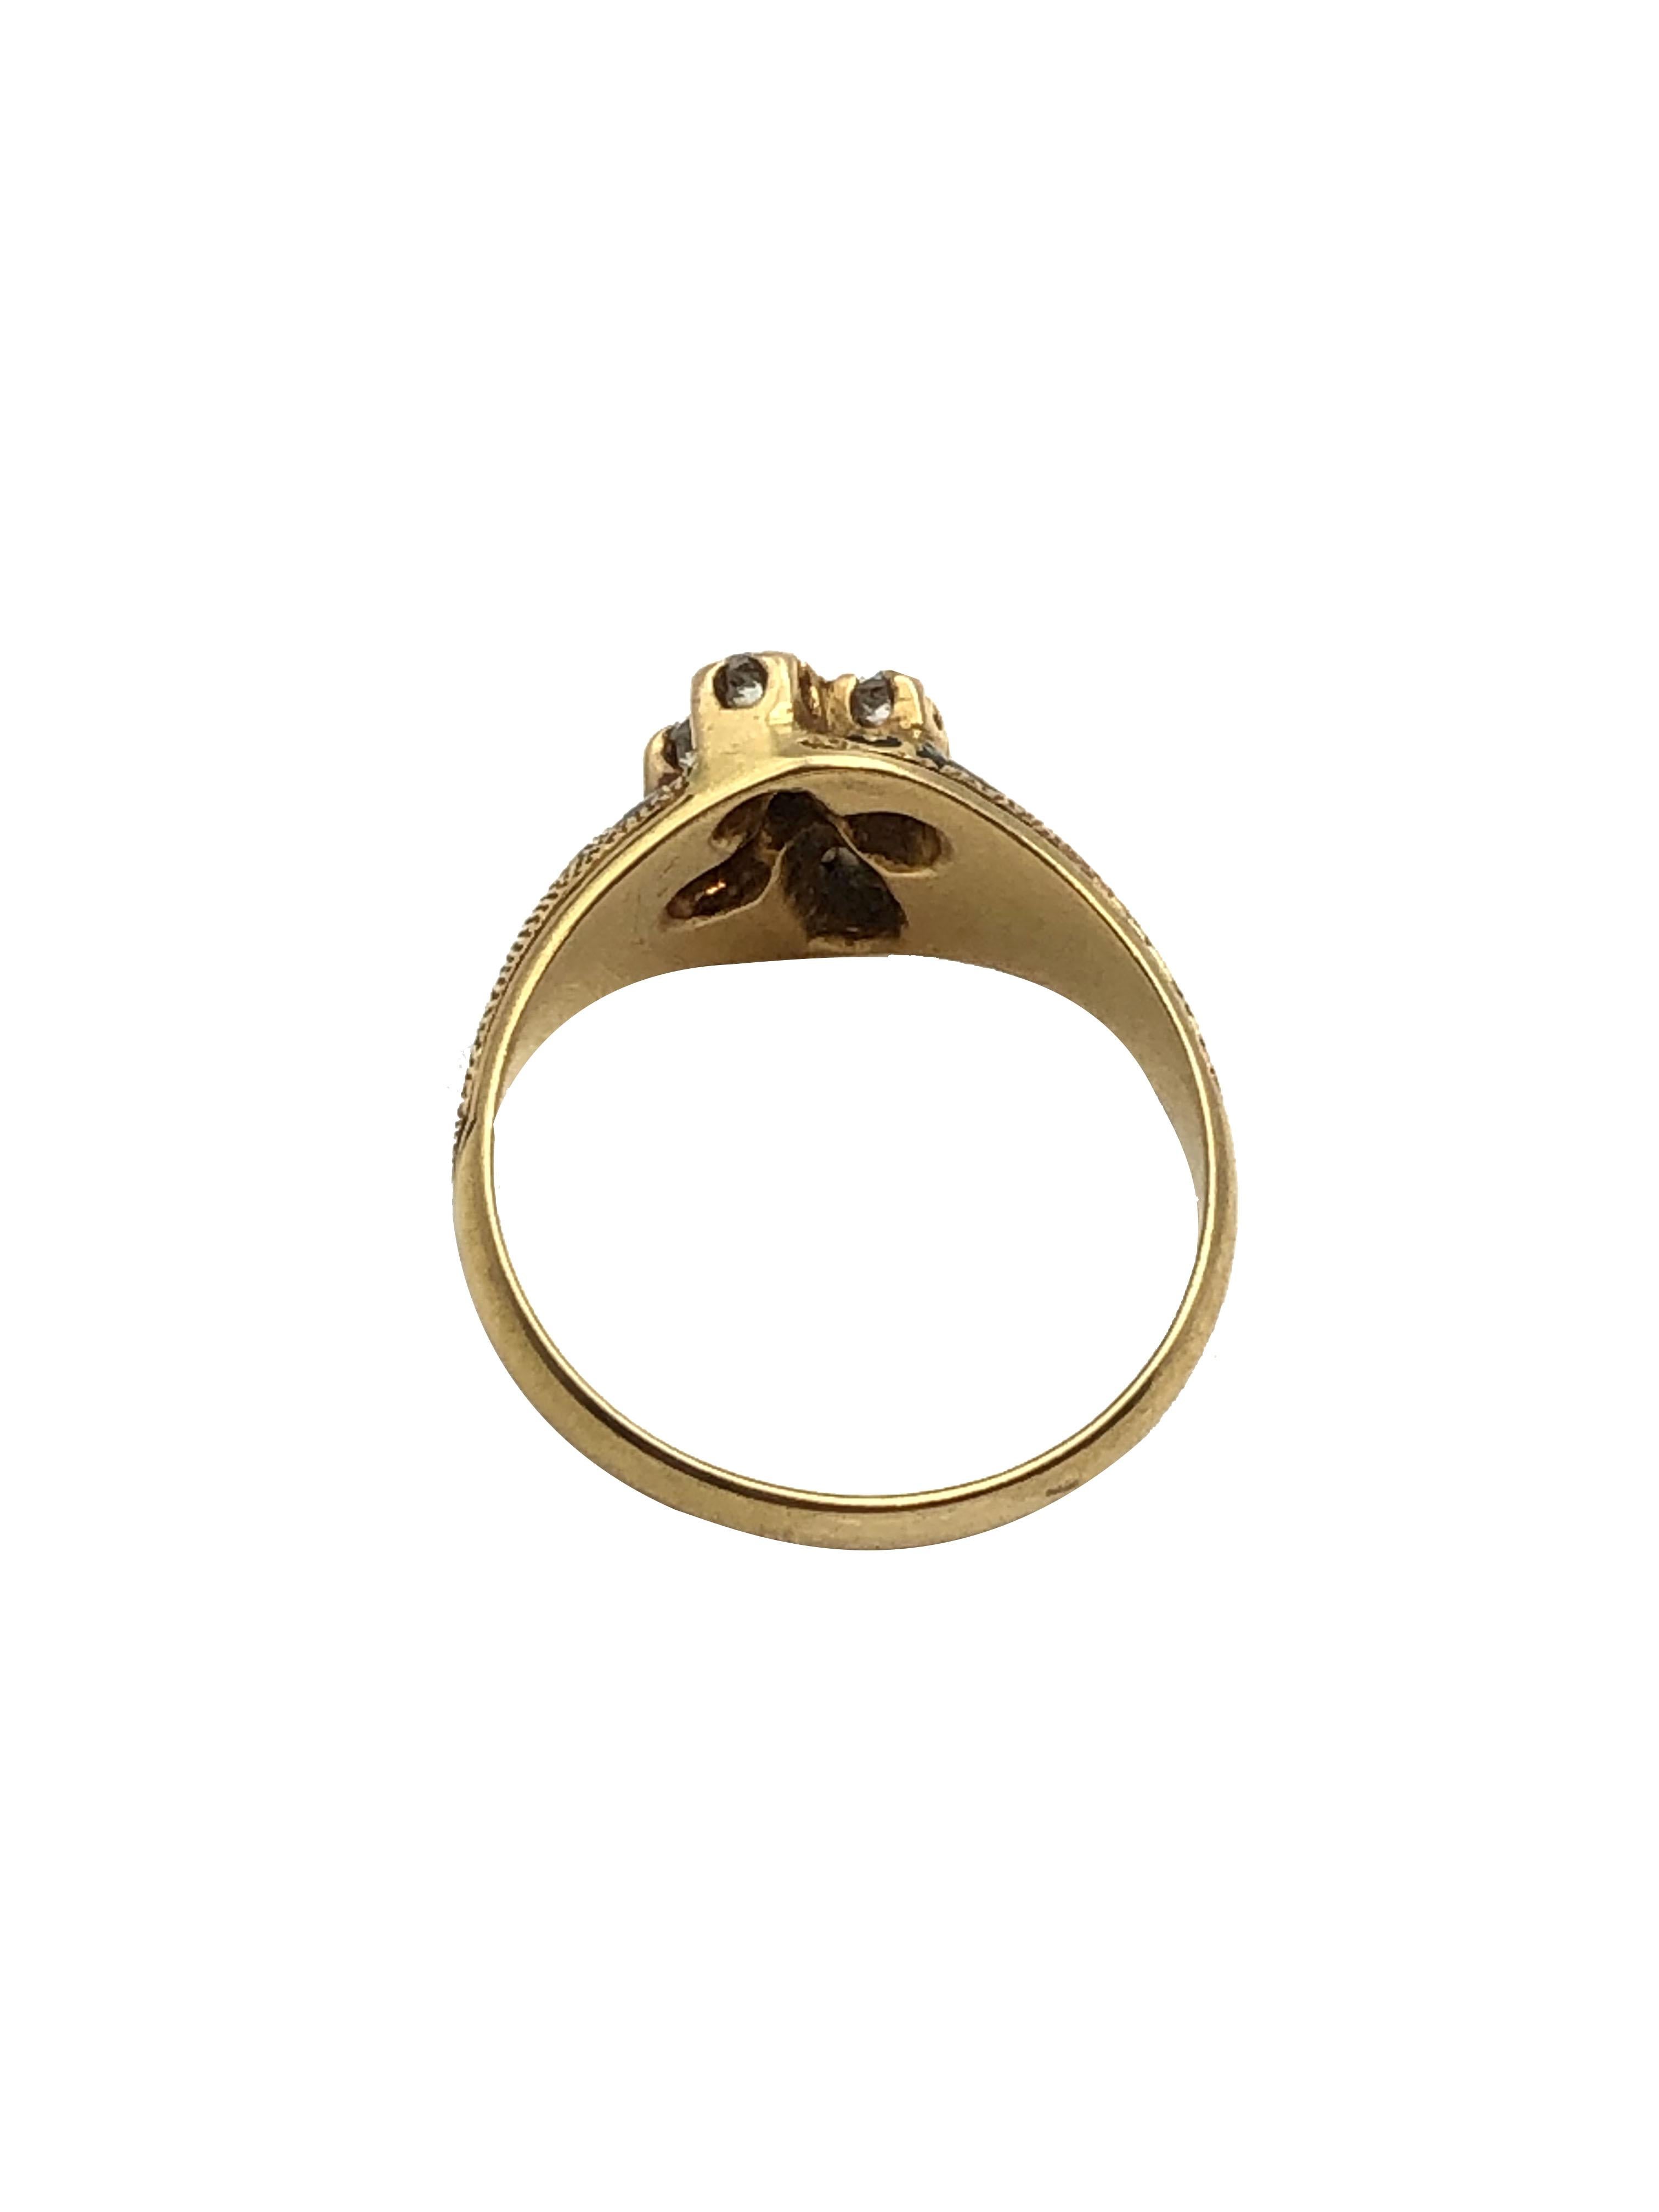 Circa 1850s 18K Yellow Gold Ring, the top with a raised Cross that is set with Old Mine cut Diamonds and measuring 1/2 X 3/8 inch, having Texturing design work and further decorated with Enamel. Finger size 6. 